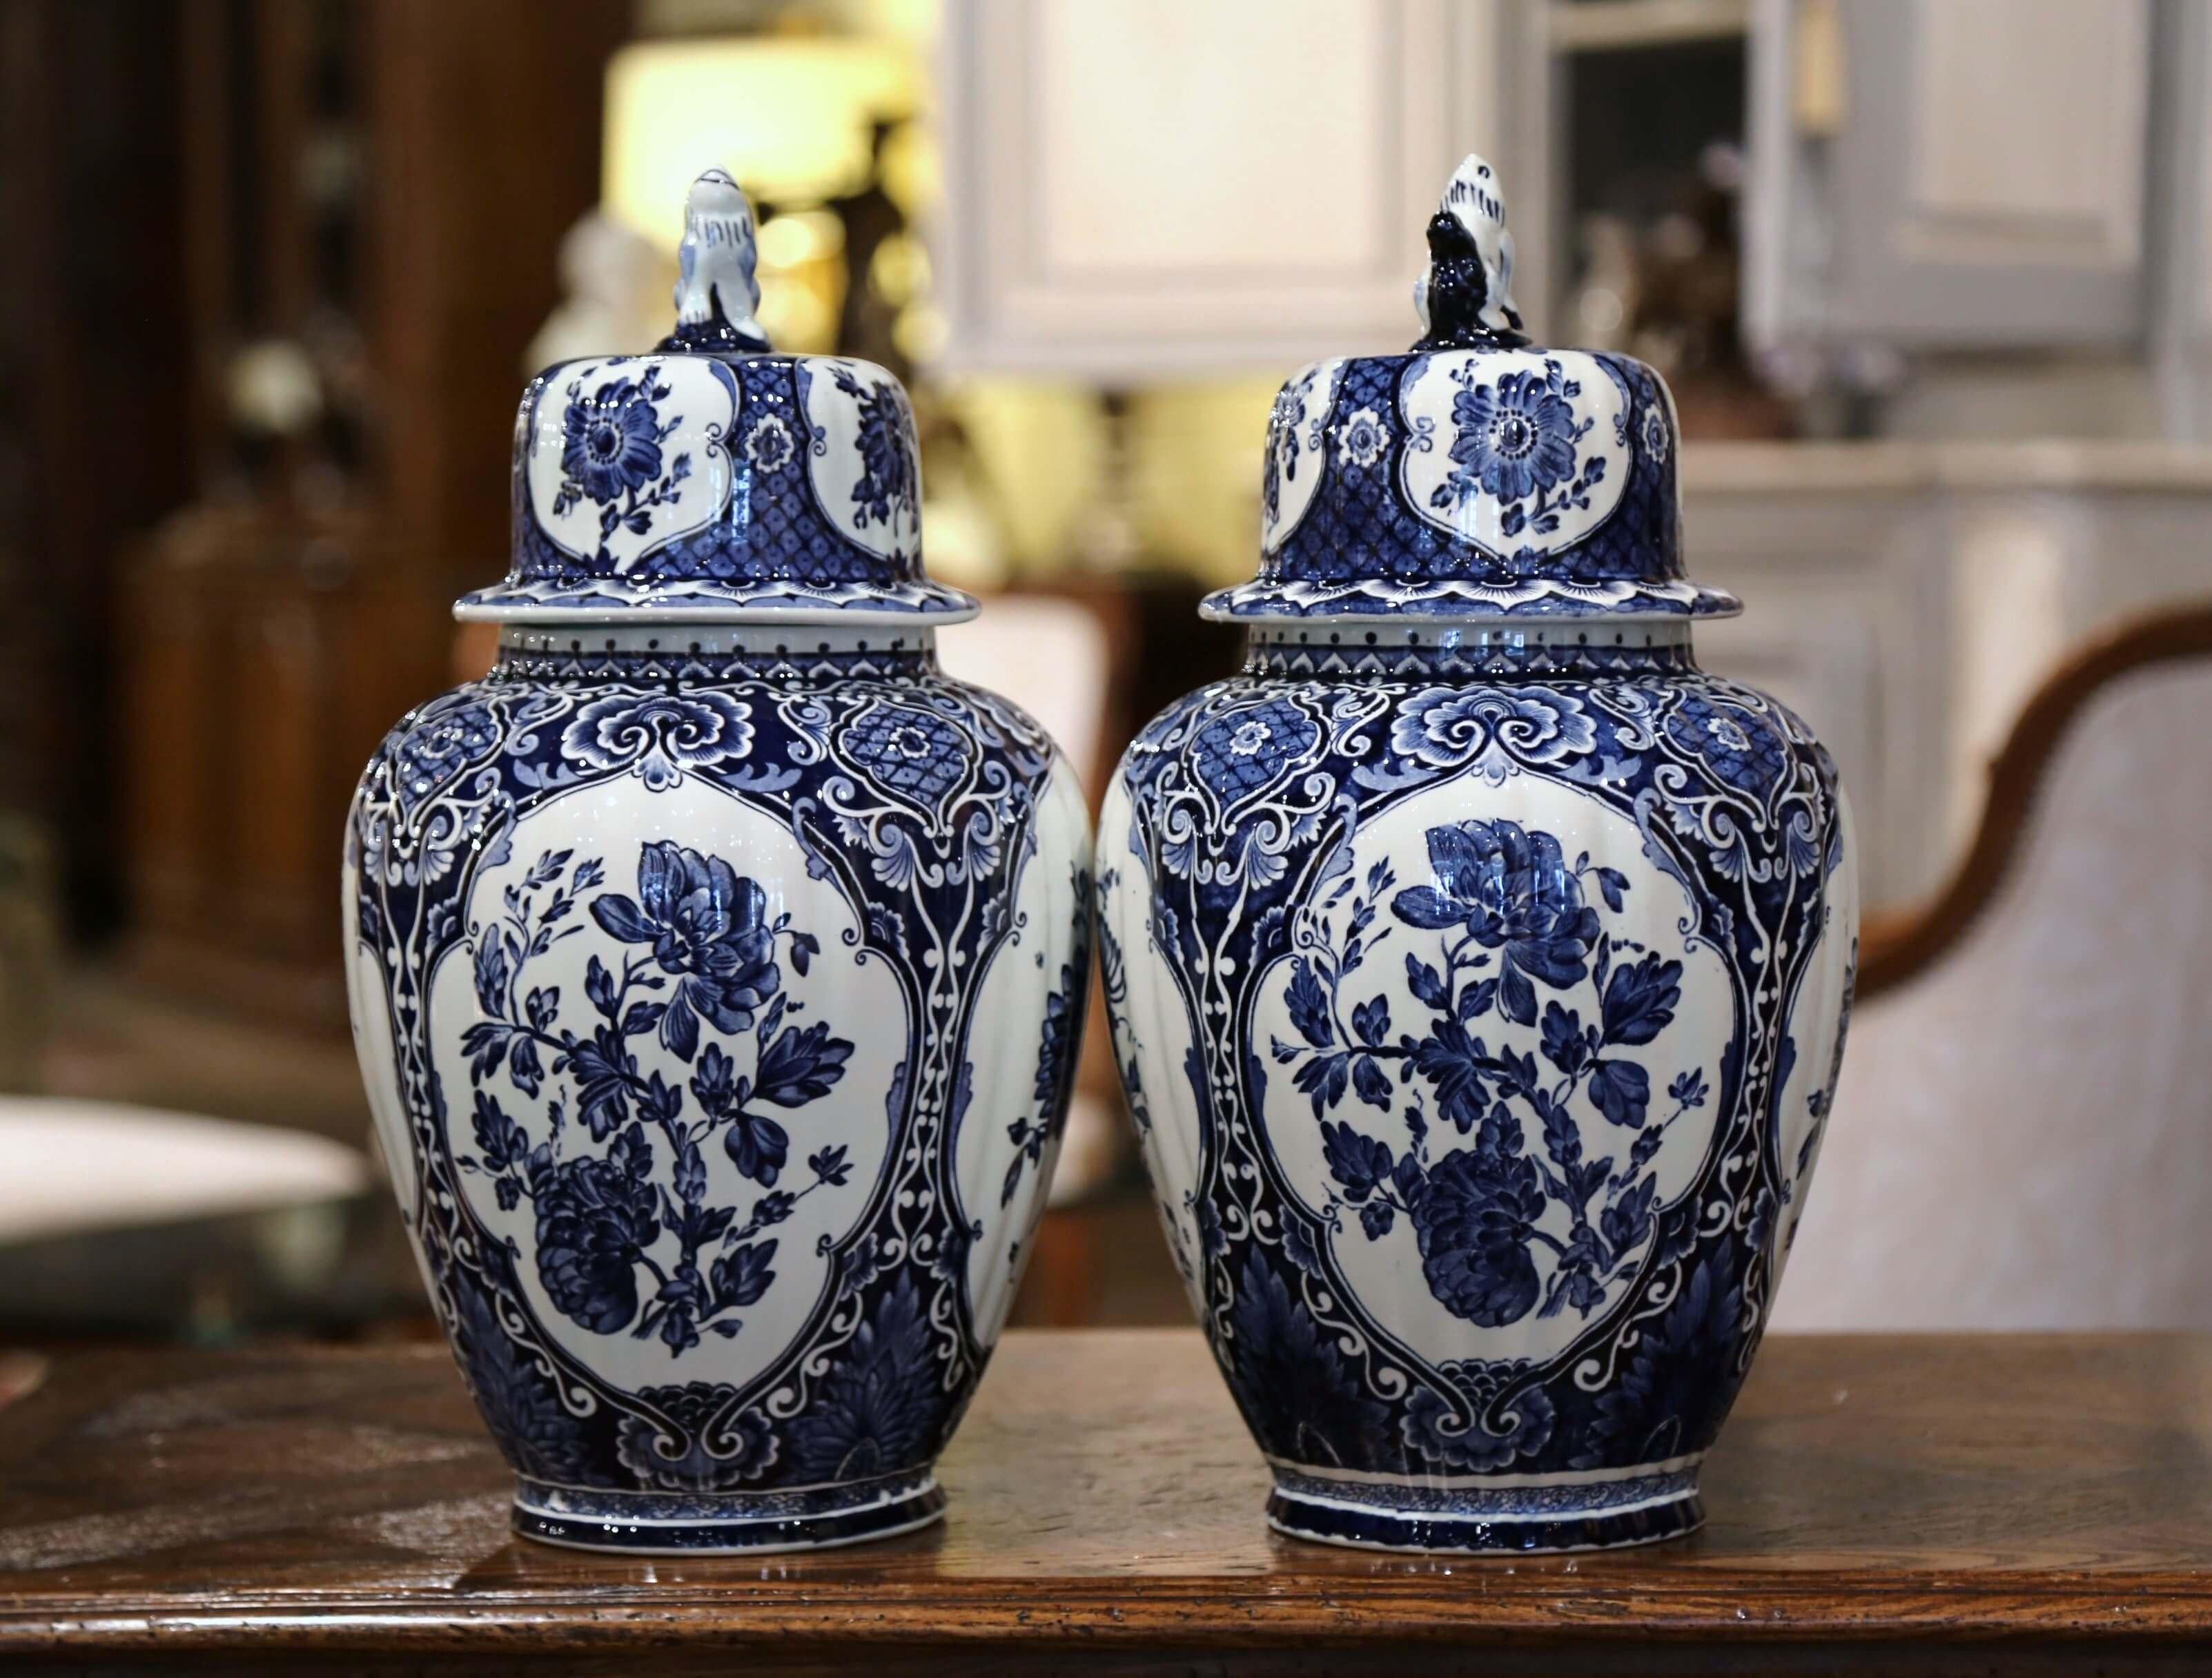 Ceramic Pair of Mid-20th Century Dutch Painted Blue and White Faience Delft Ginger Jars